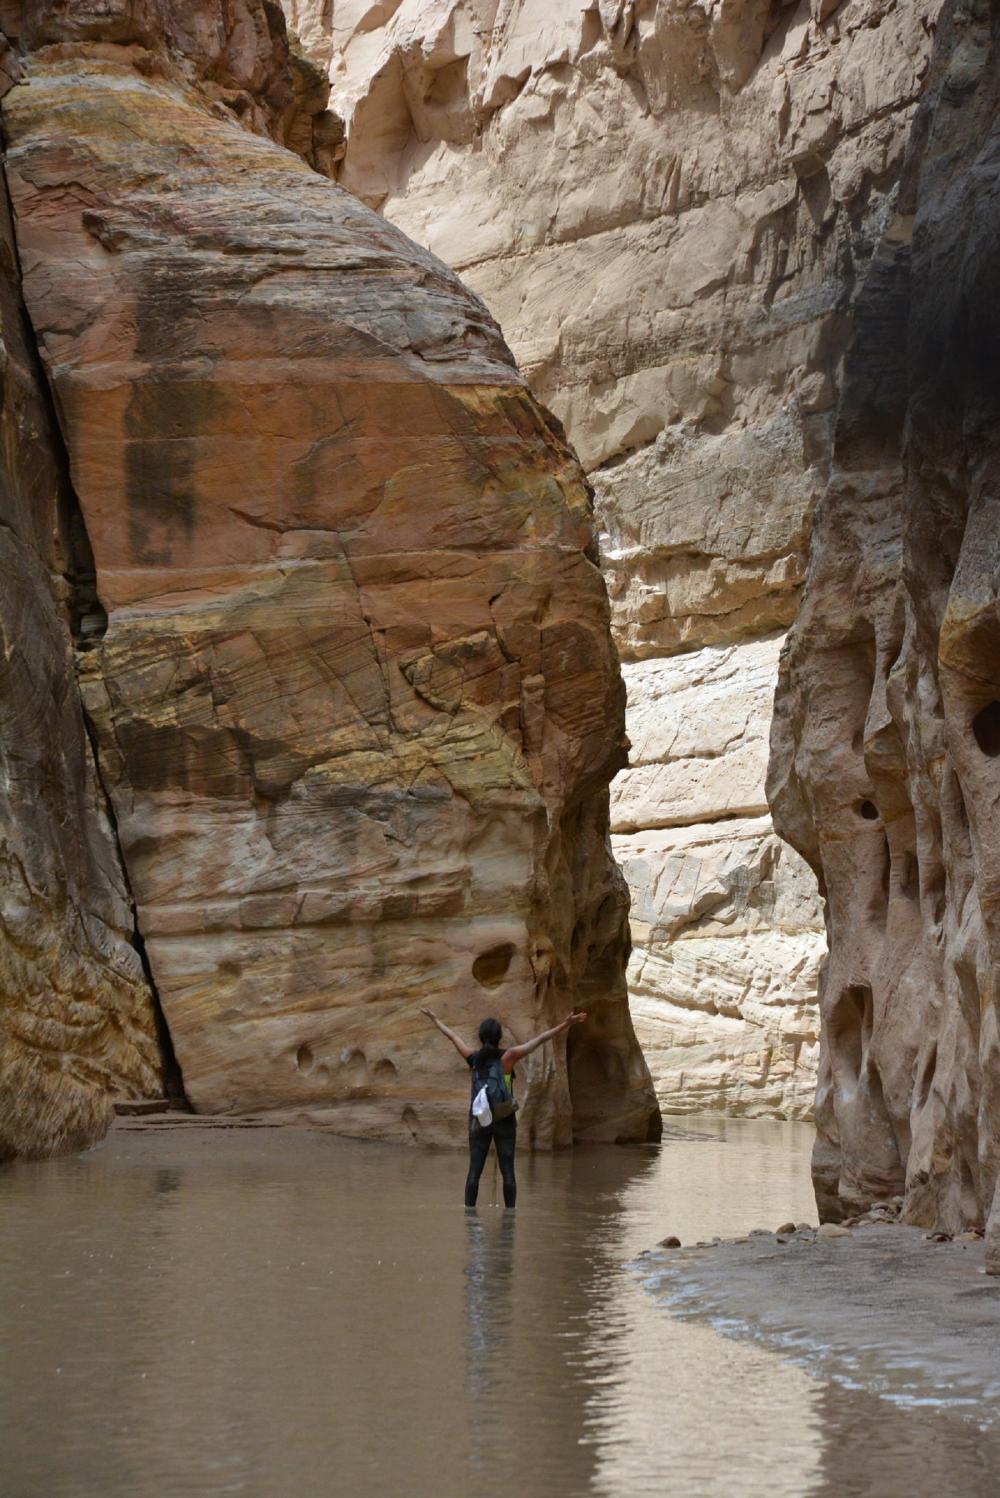 A hiker stands in the middle of a shallow river running through one of Emery County's slot canyons.